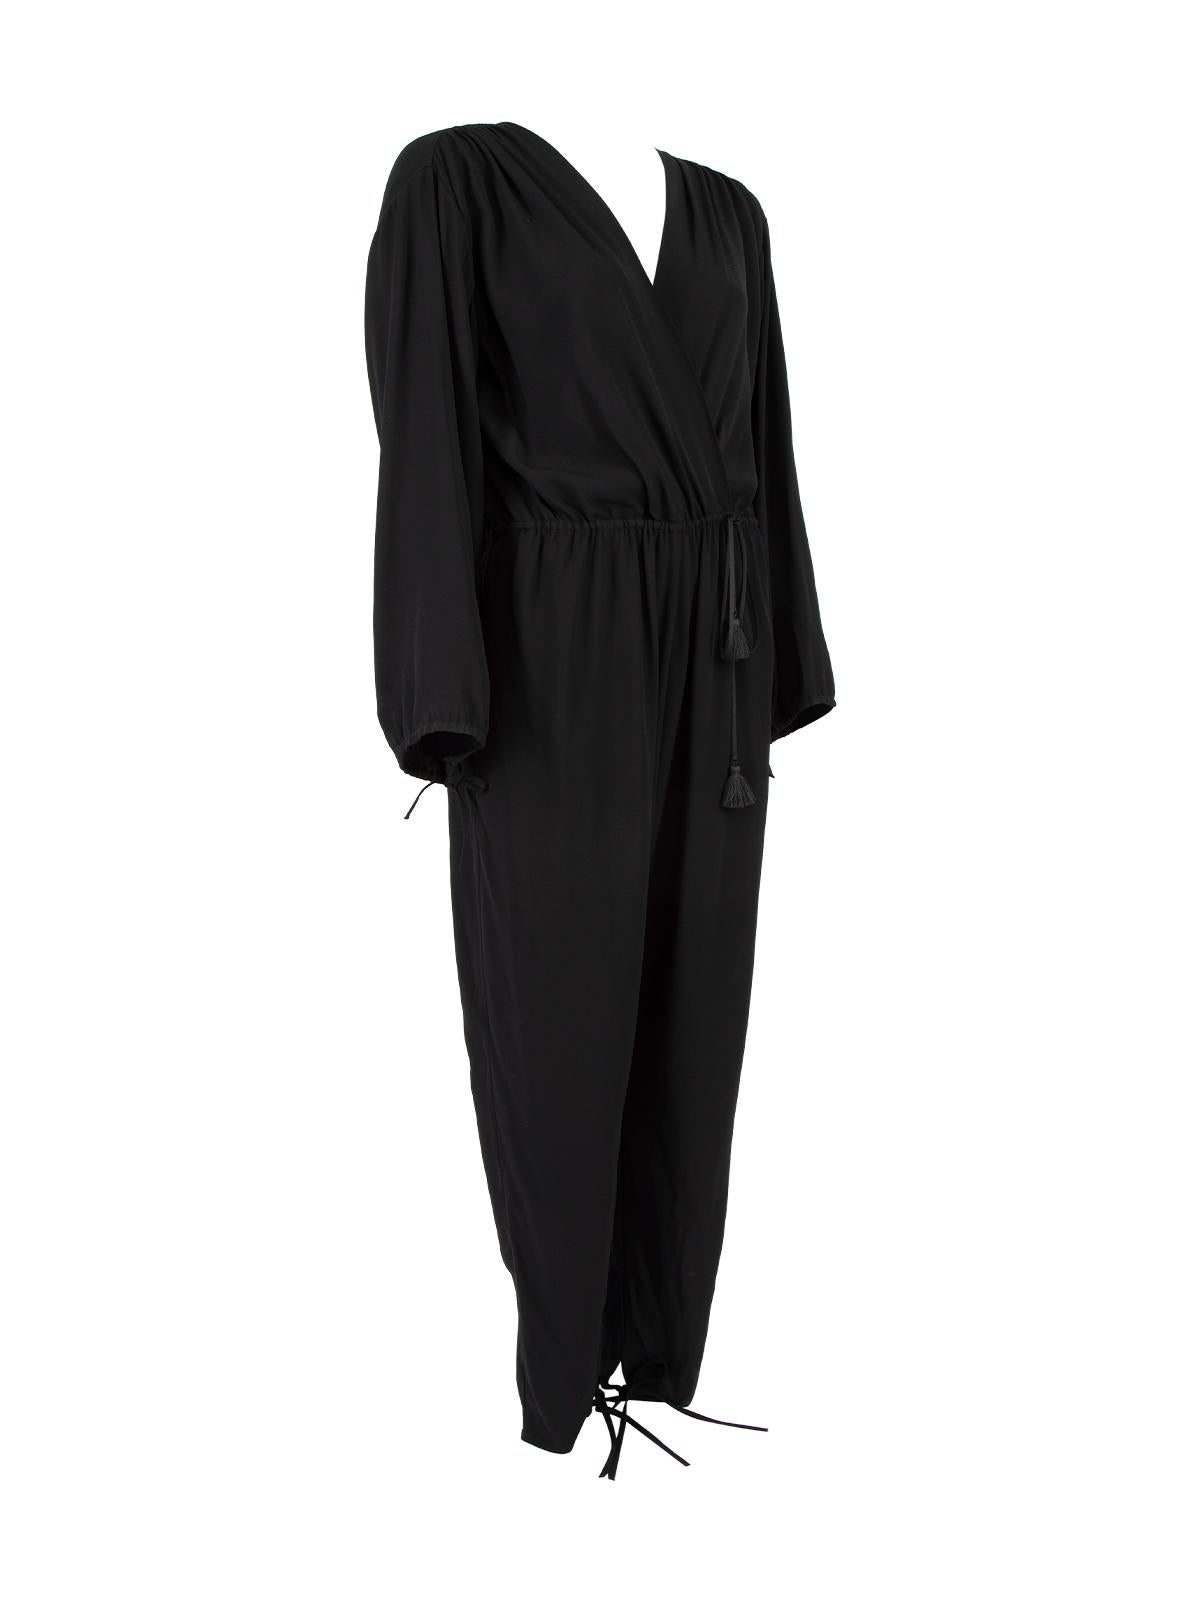 CONDITION is Never worn, with tags. No visible wear to jumpsuit is evident on this new Chloe designer resale item. Details Black Viscose Relaxed fit Long sleeves V-neckline Made in FRANCE Composition 59% VISCOSE, 41% ACETATE Care instructions: